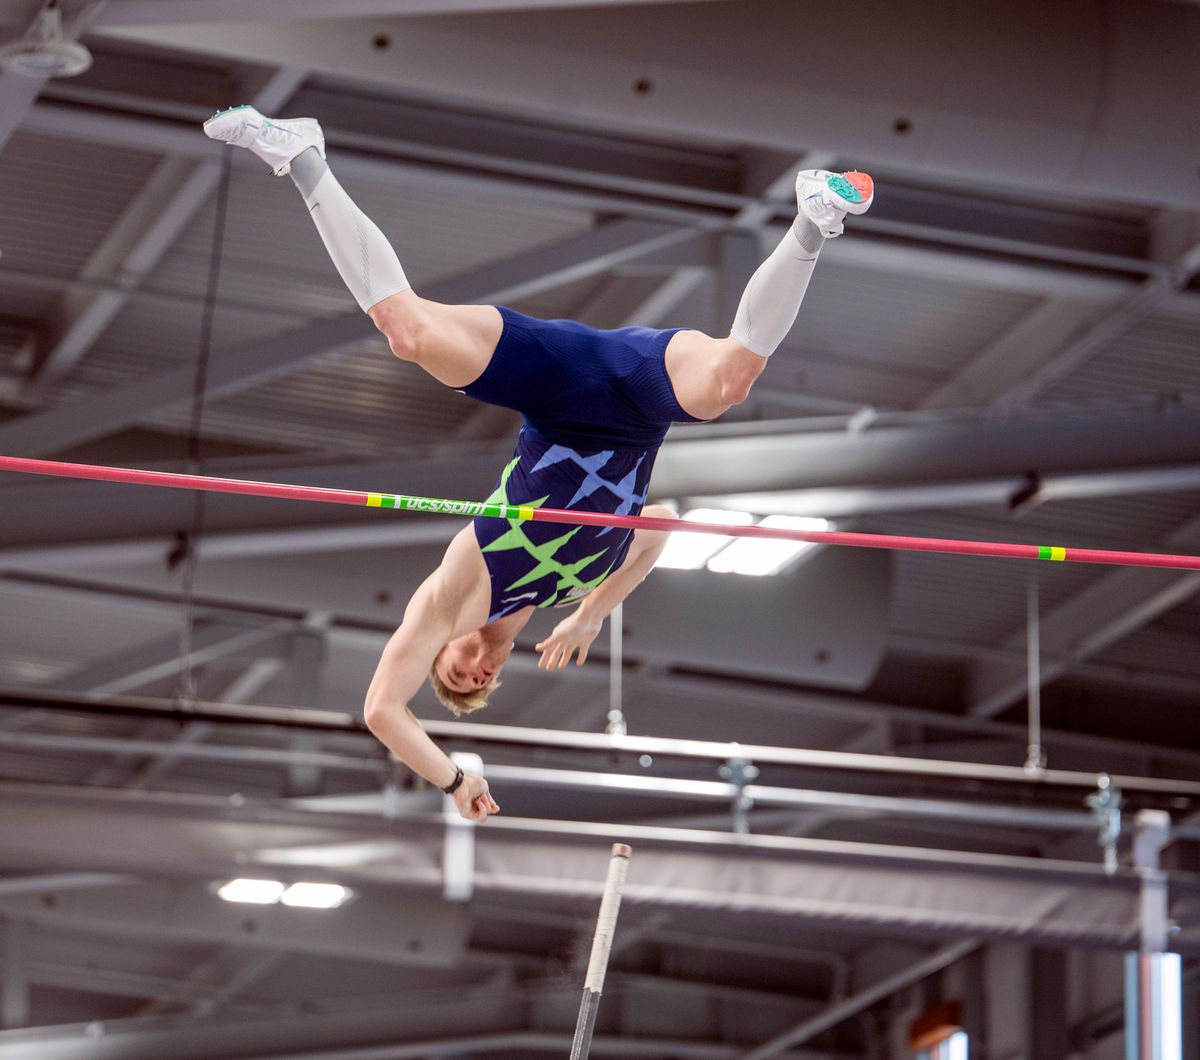 Pole vaulter Chris Nilsen clears the bar at 19 feet, 4¾ inches to win the event at the USATF Indoor Championships Saturday at the Podium.  (JESSE TINSLEY)